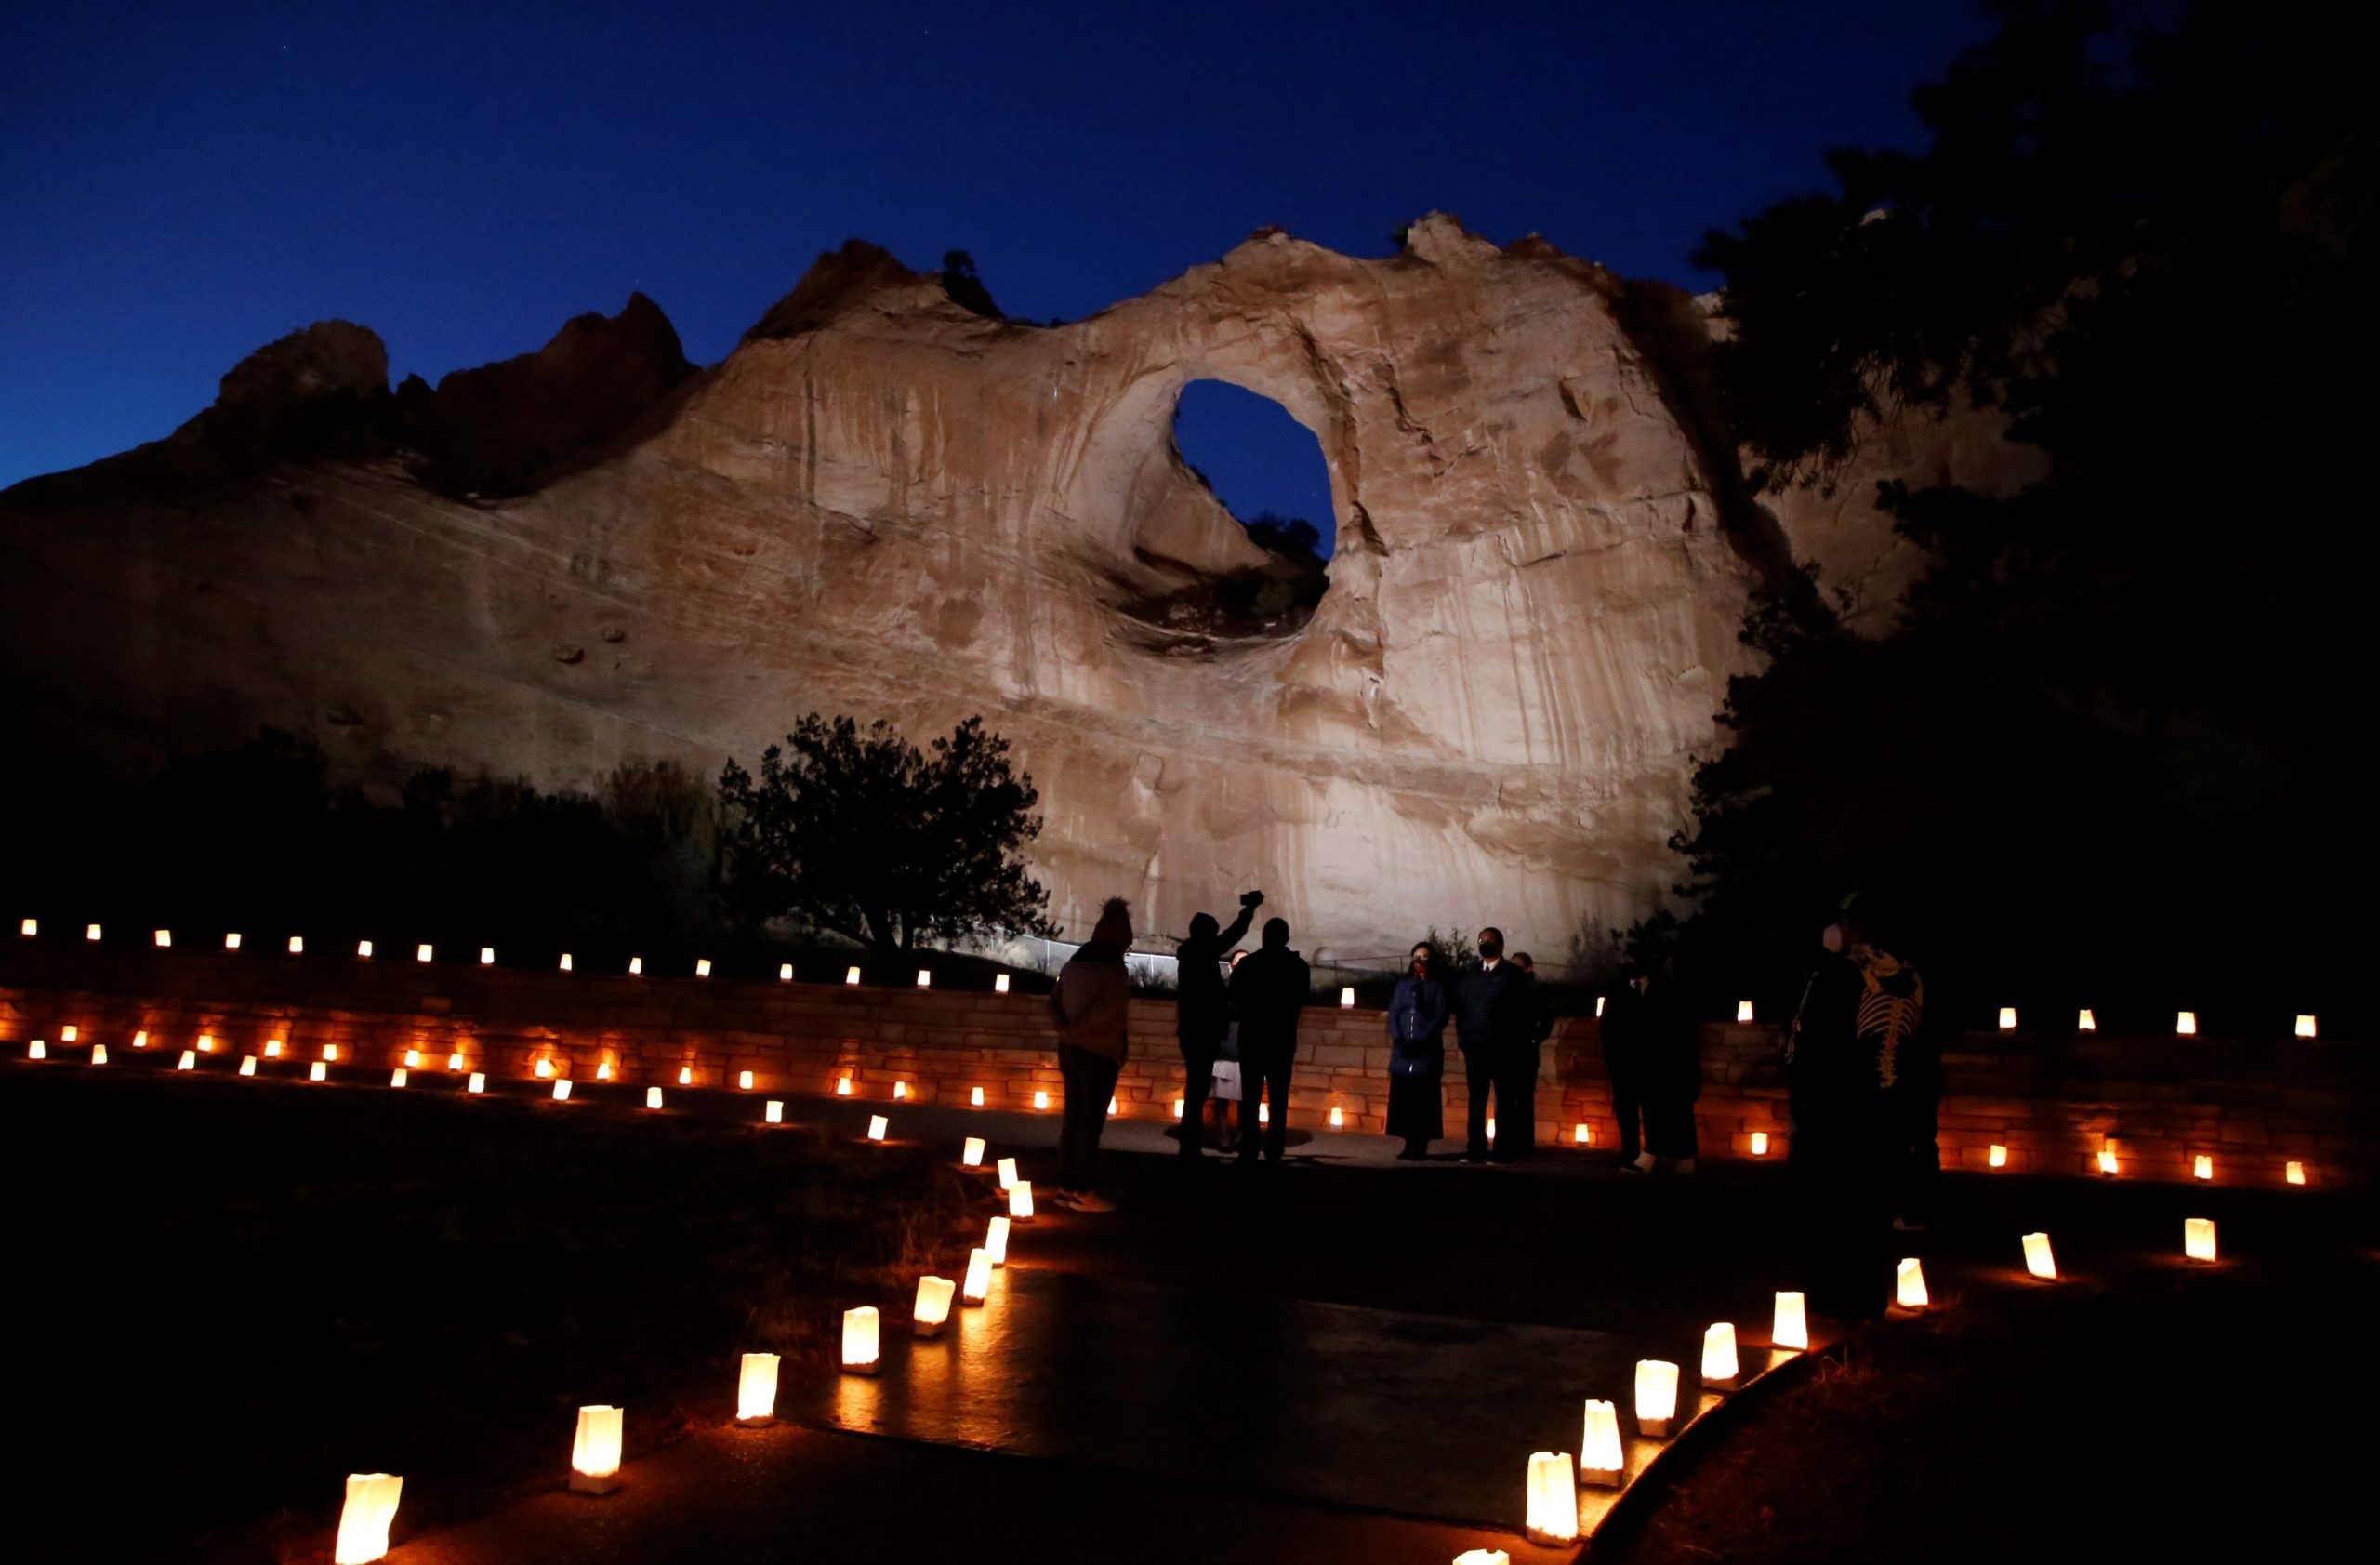 The Window Rock formation is illuminated on March 17, 2022, in Window Rock, Ariz., during an event to remember members of the Navajo Nation who died of COVID-19.